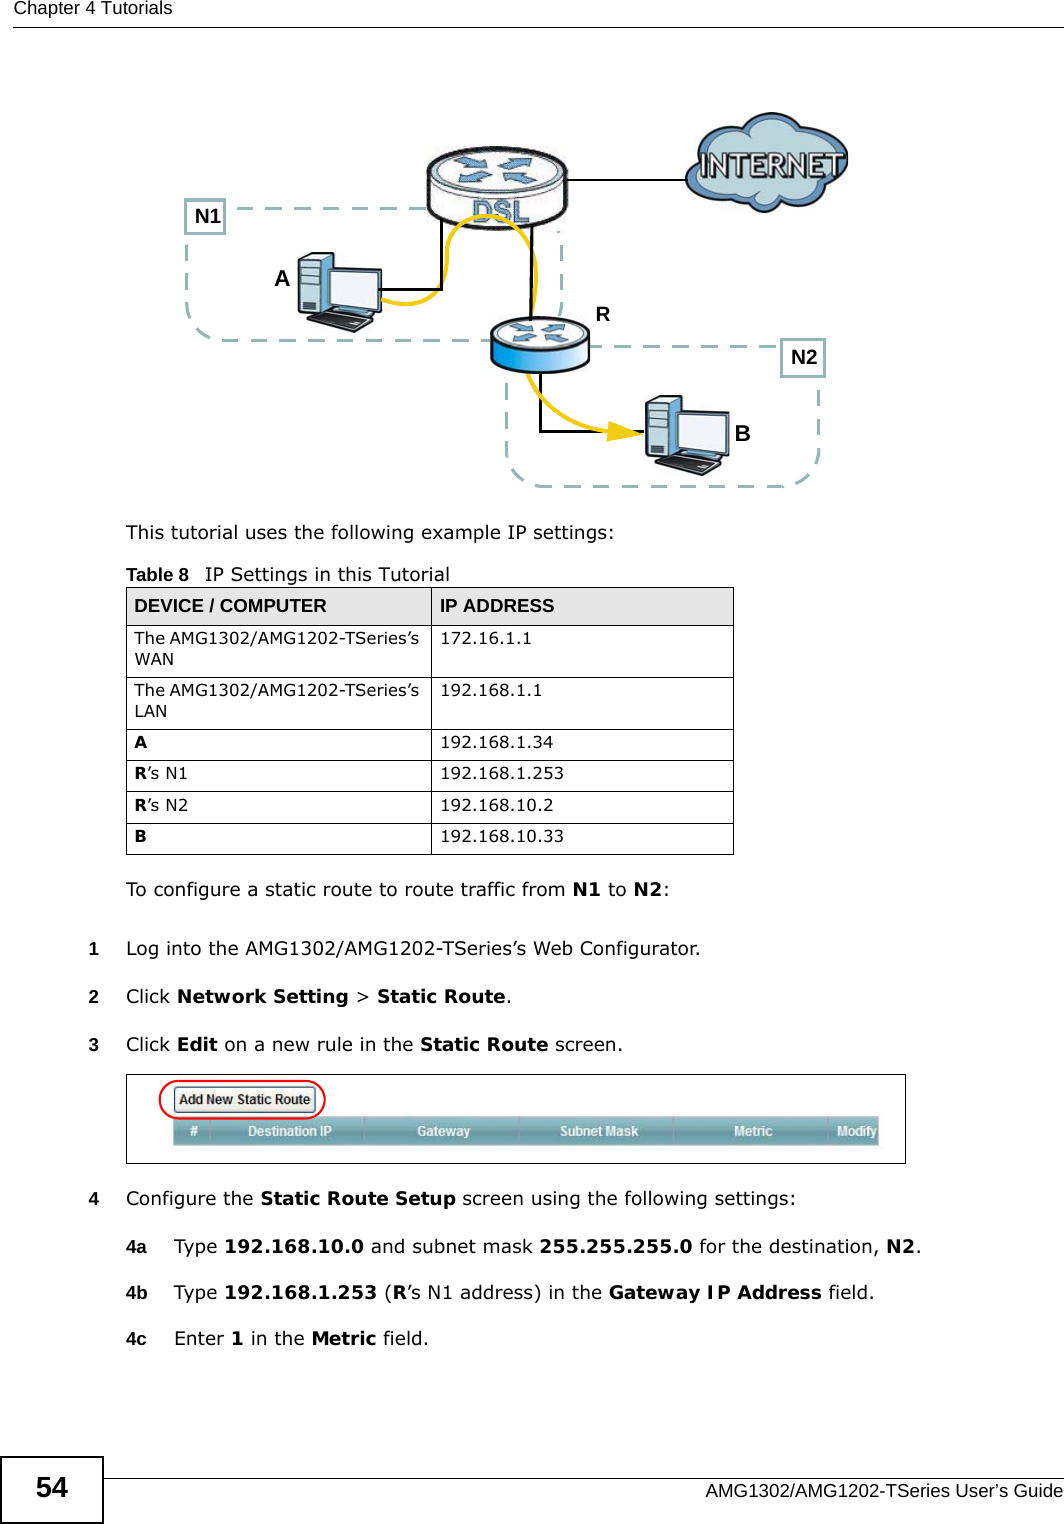 Chapter 4 TutorialsAMG1302/AMG1202-TSeries User’s Guide54This tutorial uses the following example IP settings:To configure a static route to route traffic from N1 to N2:1Log into the AMG1302/AMG1202-TSeries’s Web Configurator.2Click Network Setting &gt; Static Route.3Click Edit on a new rule in the Static Route screen.4Configure the Static Route Setup screen using the following settings:4a Type 192.168.10.0 and subnet mask 255.255.255.0 for the destination, N2.4b Type 192.168.1.253 (R’s N1 address) in the Gateway IP Address field.4c Enter 1 in the Metric field.Table 8   IP Settings in this TutorialDEVICE / COMPUTER IP ADDRESSThe AMG1302/AMG1202-TSeries’s WAN172.16.1.1The AMG1302/AMG1202-TSeries’s LAN192.168.1.1A192.168.1.34R’s N1  192.168.1.253R’s N2  192.168.10.2B192.168.10.33N2BN1AR